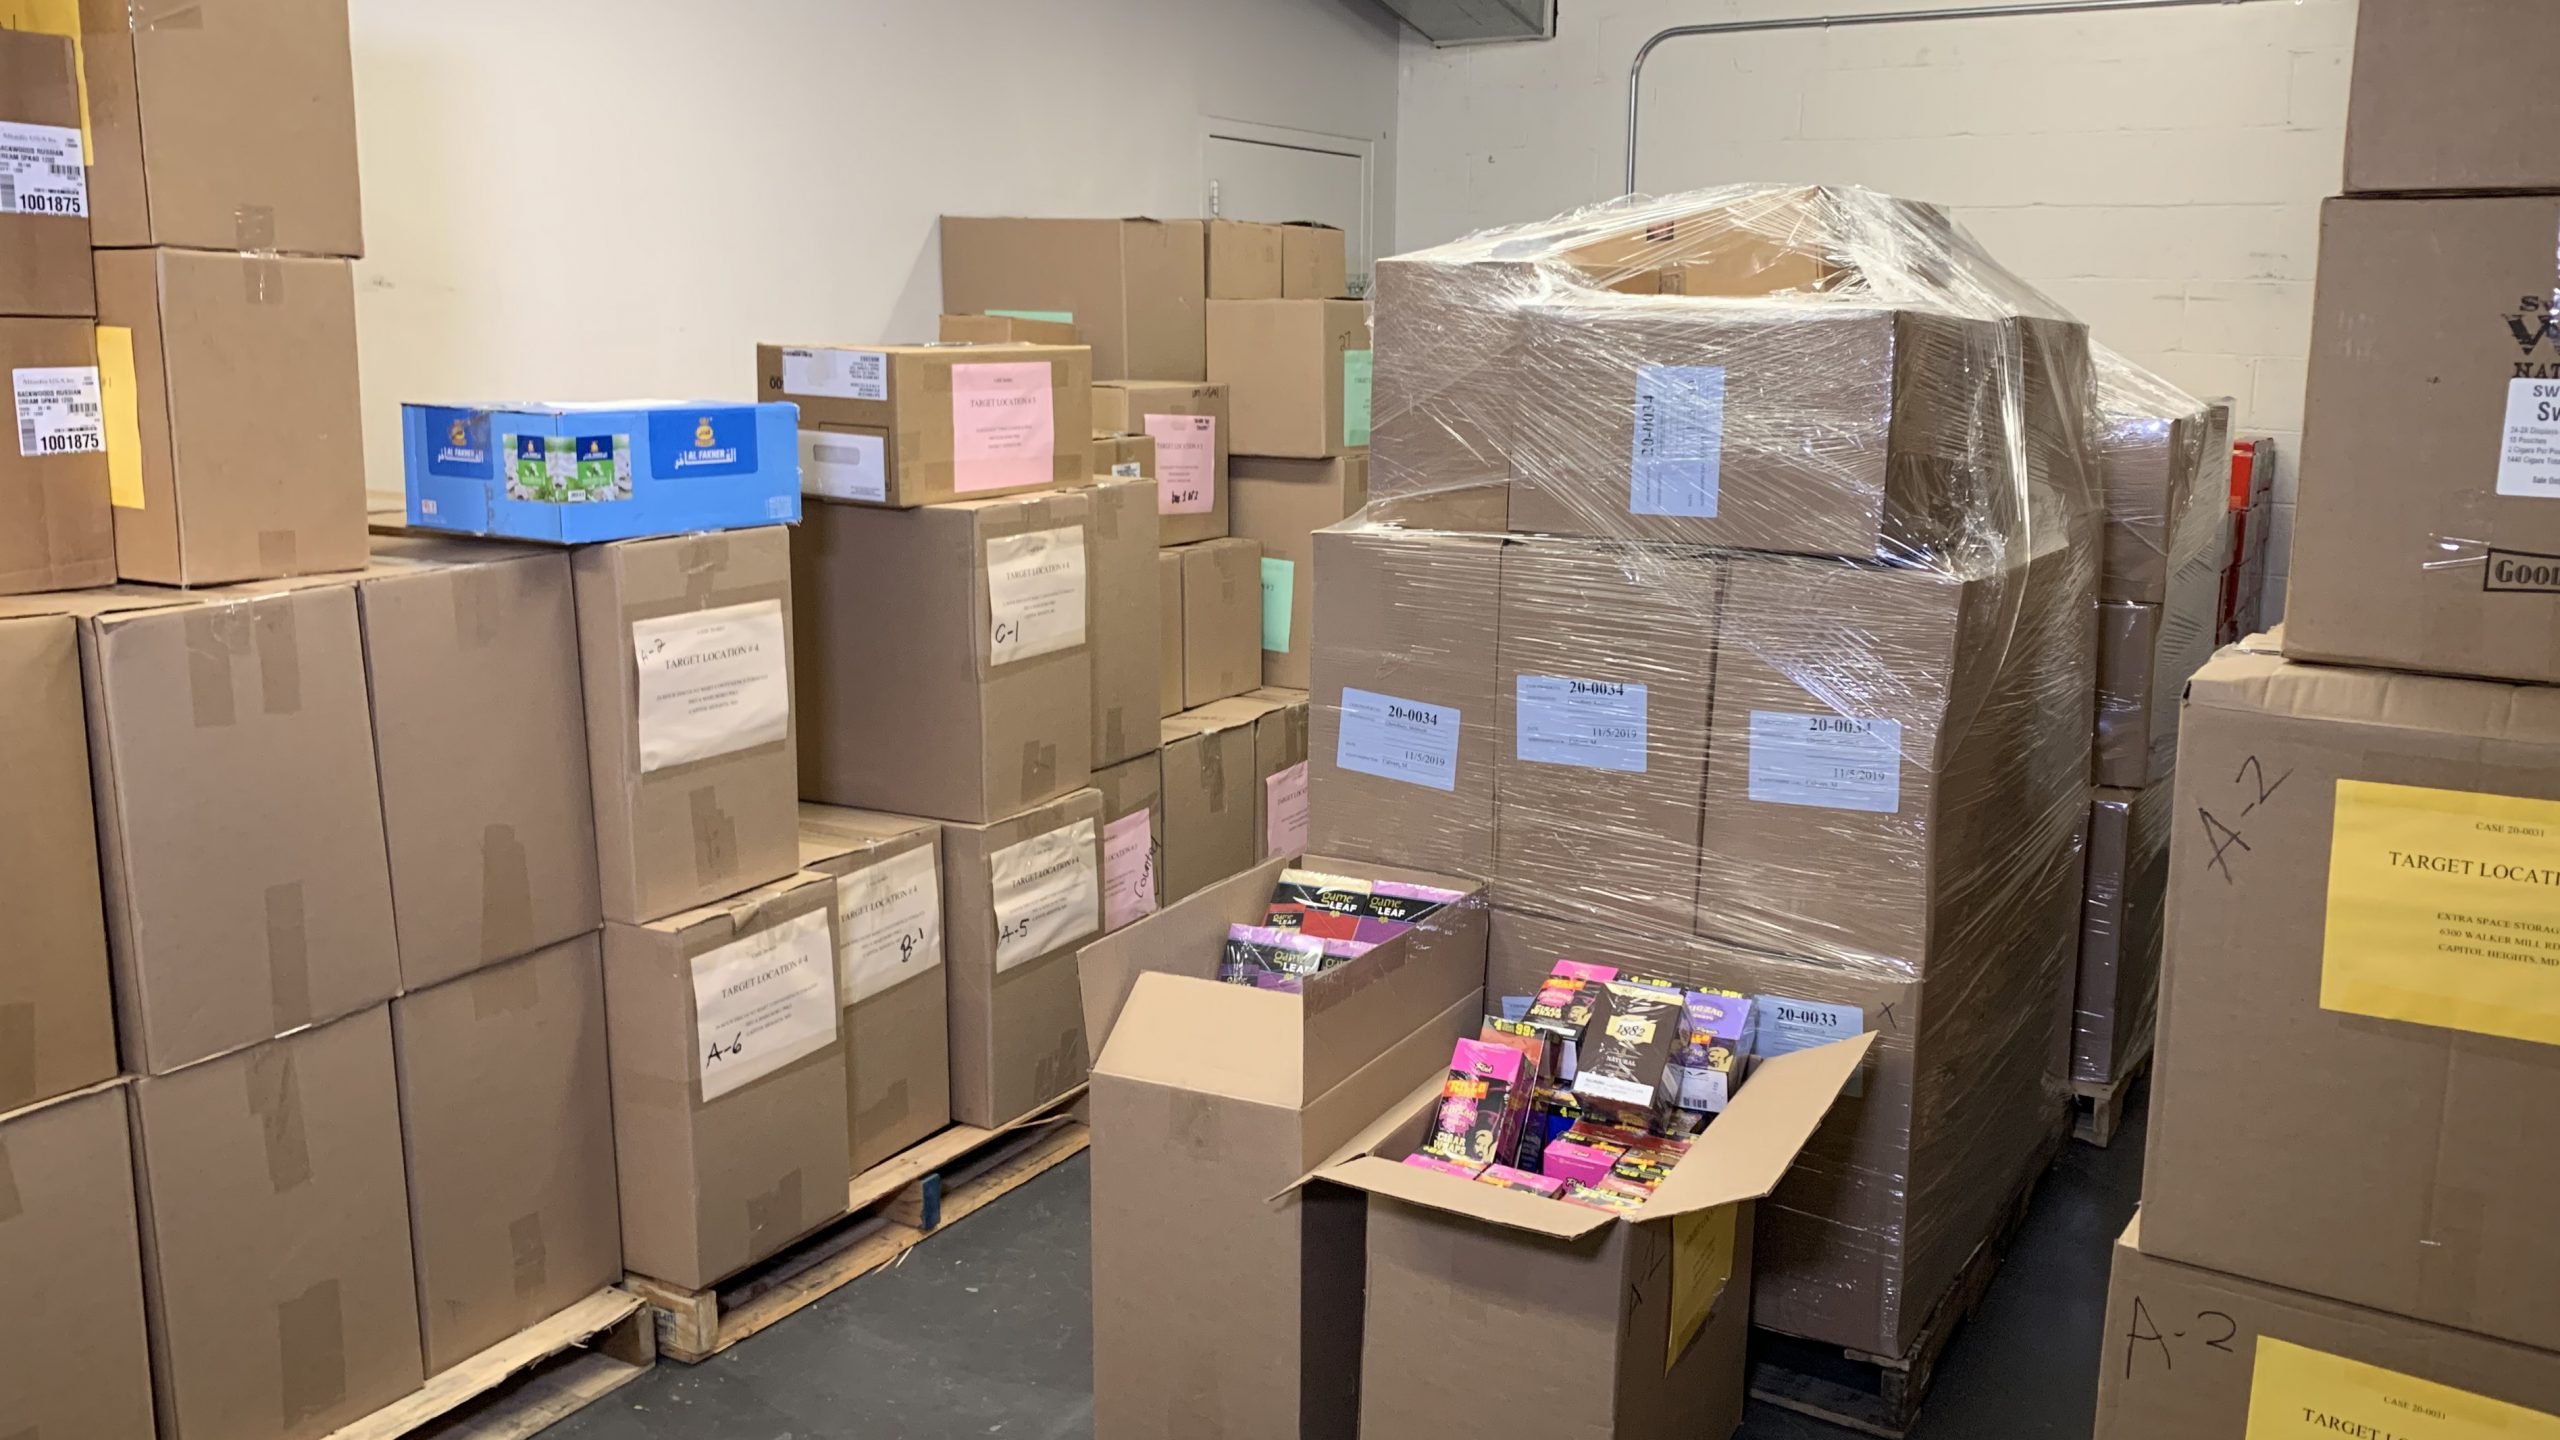 Boxes of contraband tobacco products recovered in a bust crowd a storage room in the Louis L. Goldstein Treasury Building in Annapolis on Nov. 20, 2019. (Capital News Service photo by Eric Myers.)